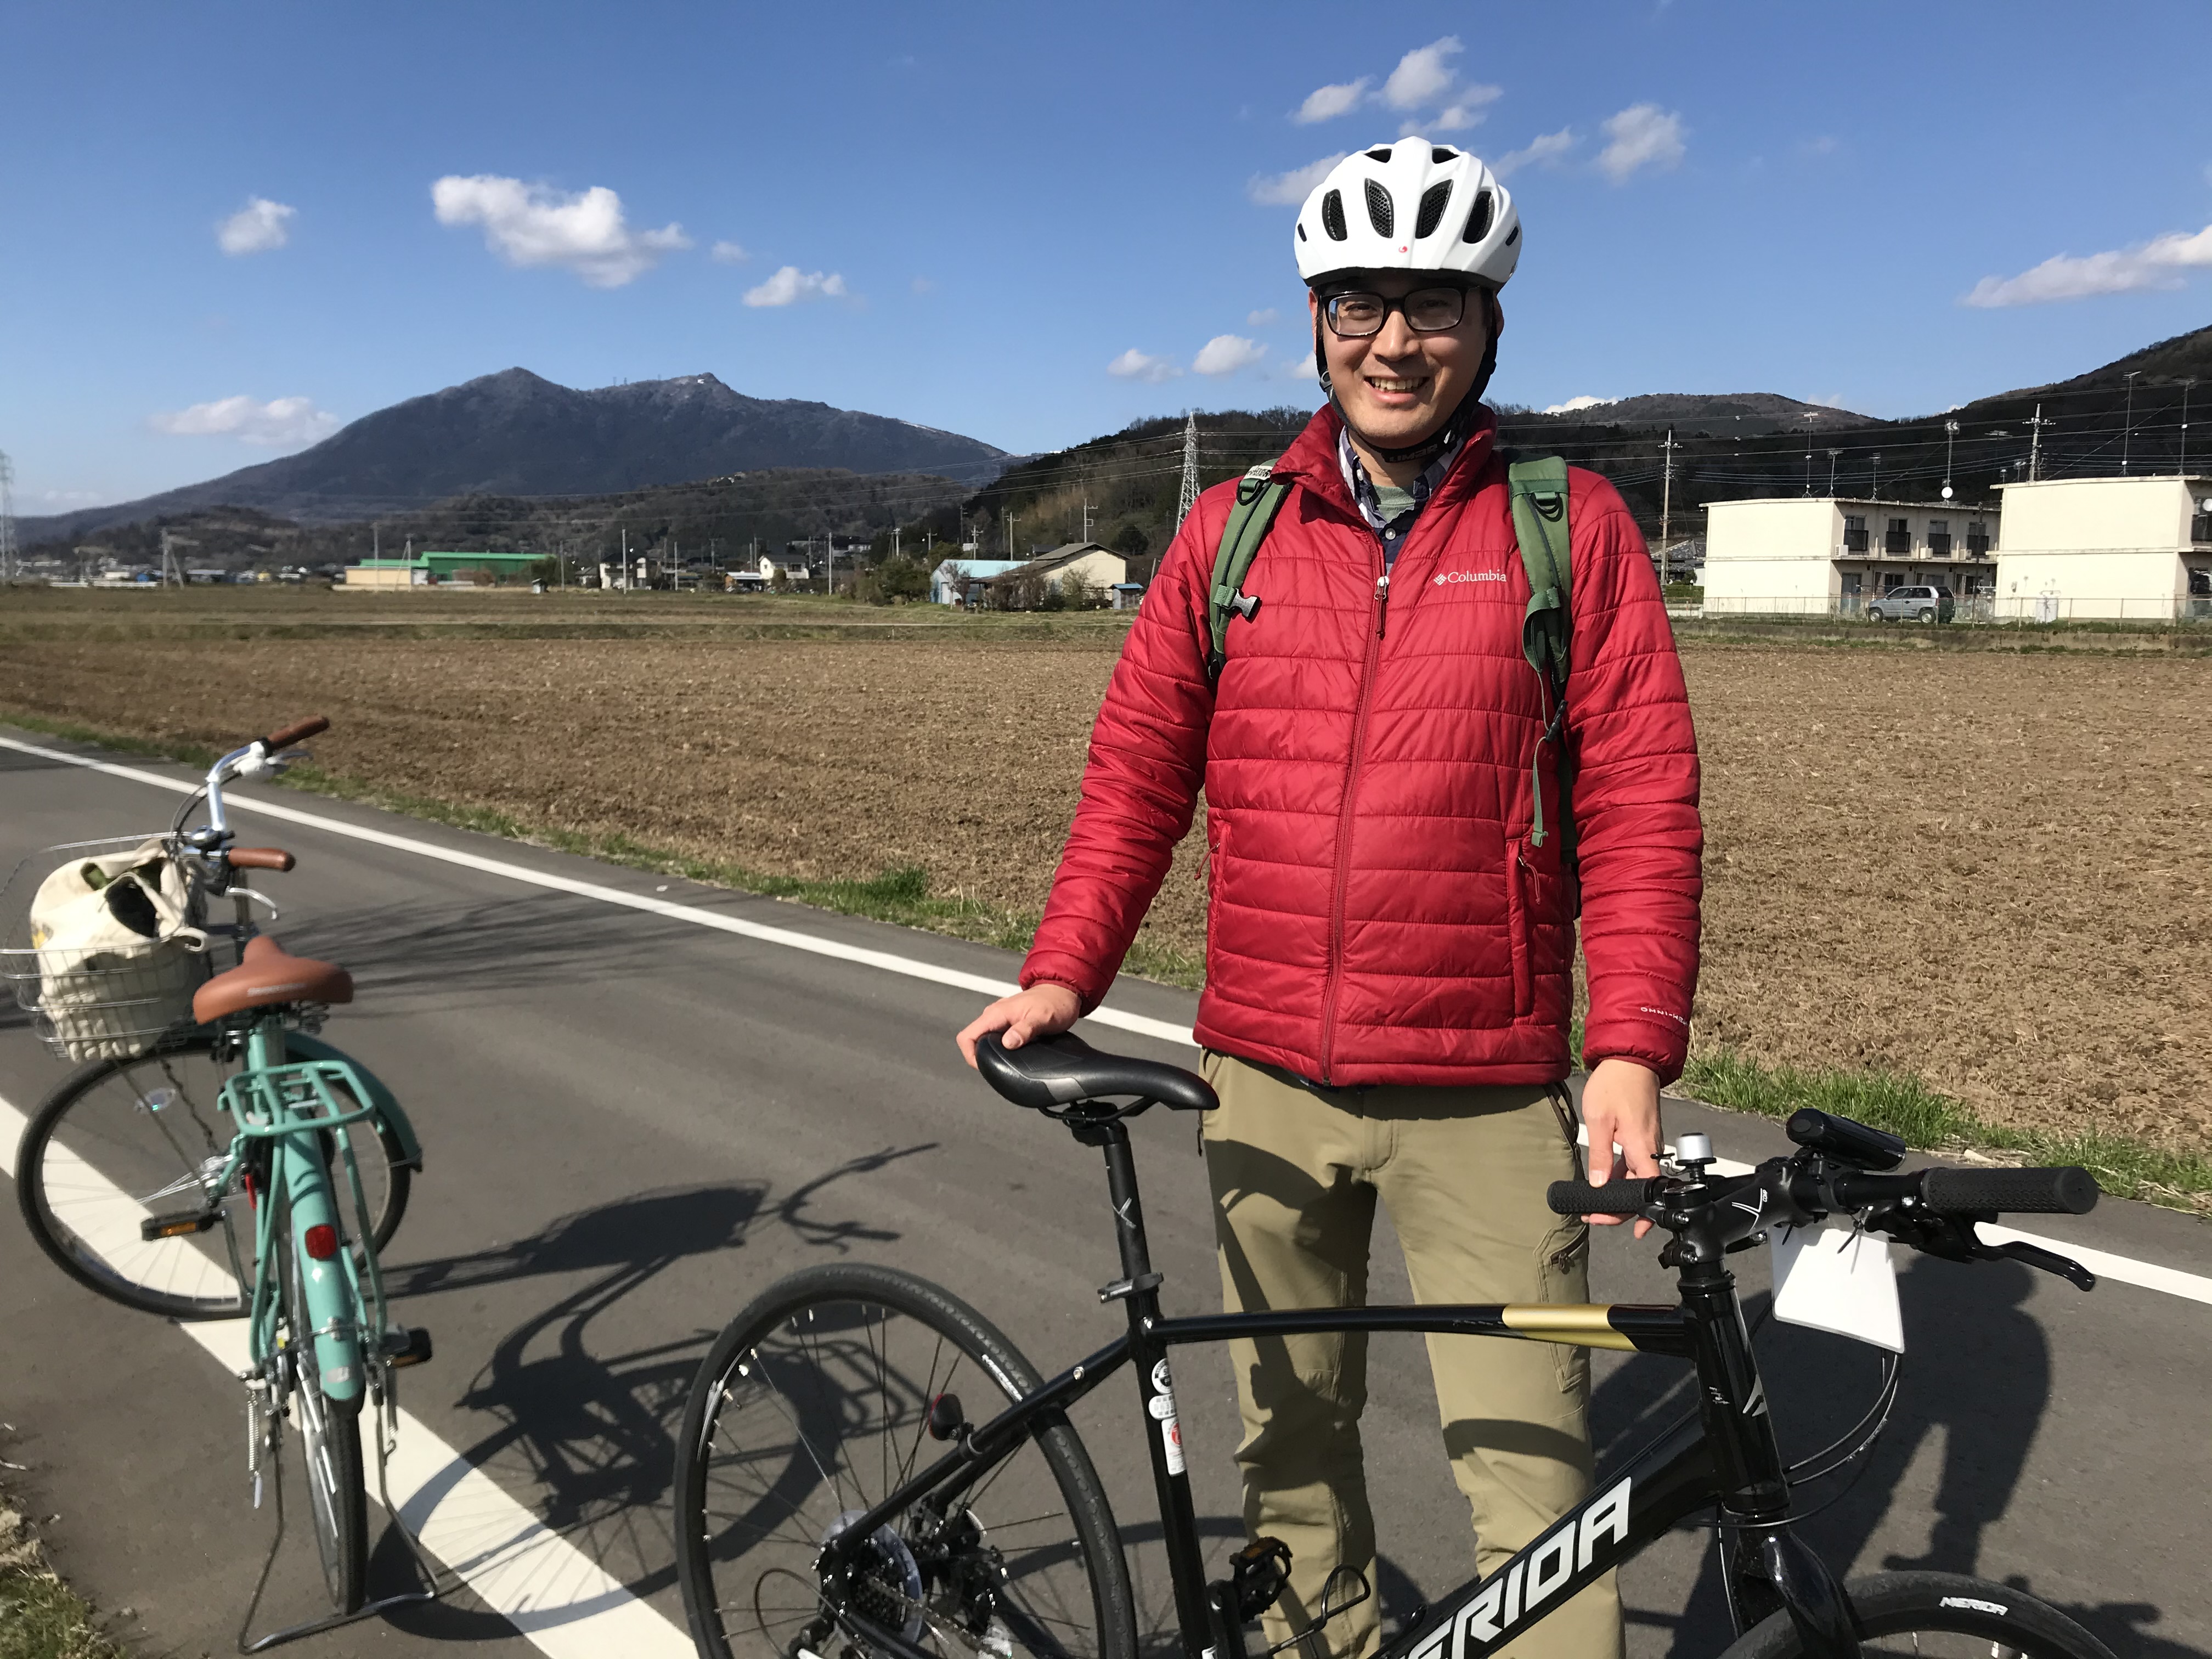 Tadayori beside his bicycle, along a long road among grassl cycle route